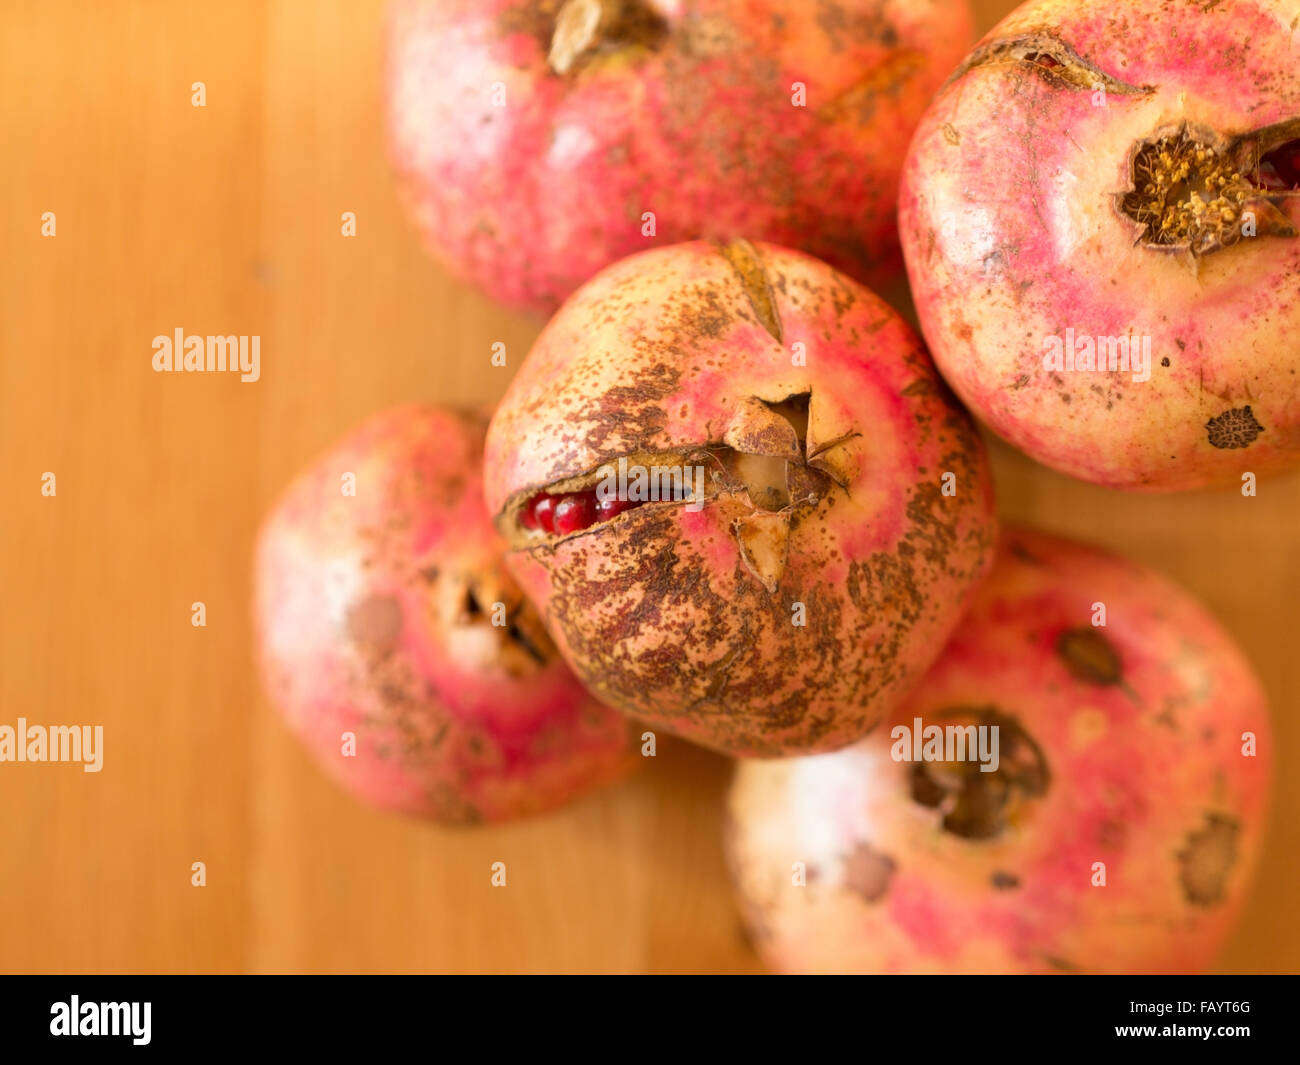 Ripe healthy pomegranate fruit top view Stock Photo